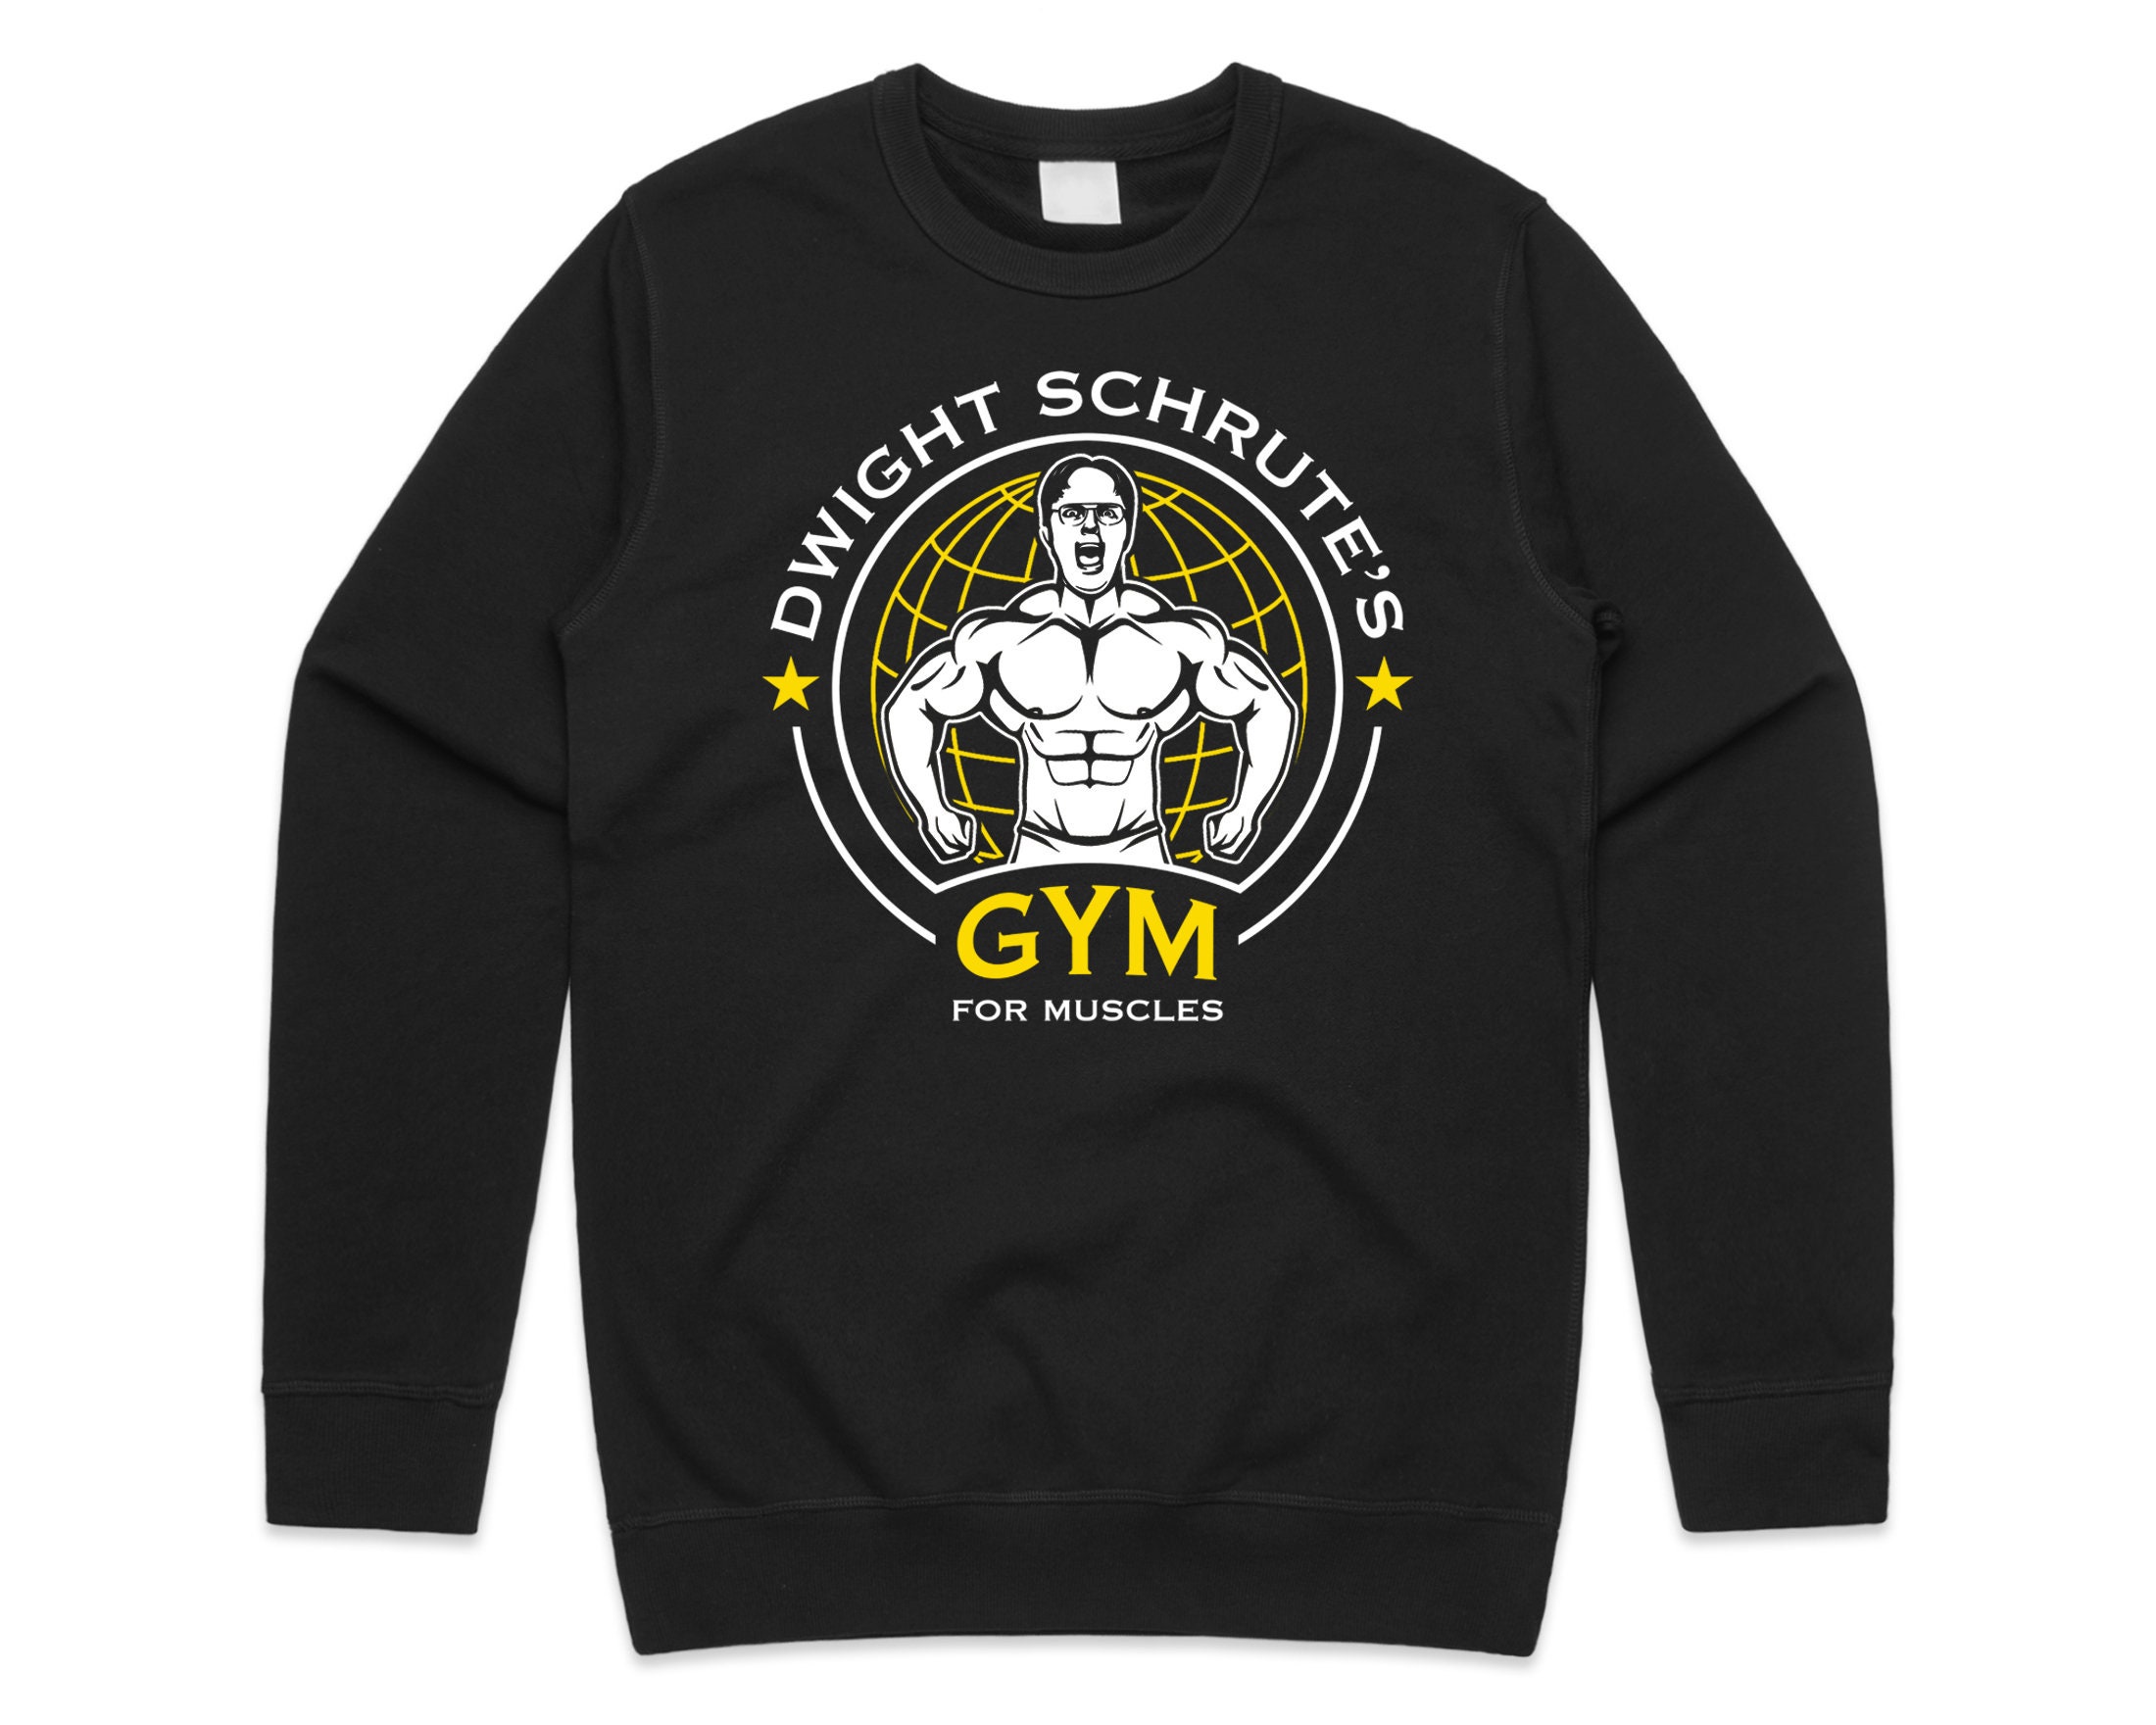 Dwight Schrute’s Gym For Muscles Jumper Sweater Sweatshirt Funny Us Office Dwight’s Bodybuilder Fitness Weightlifting Squat Gift